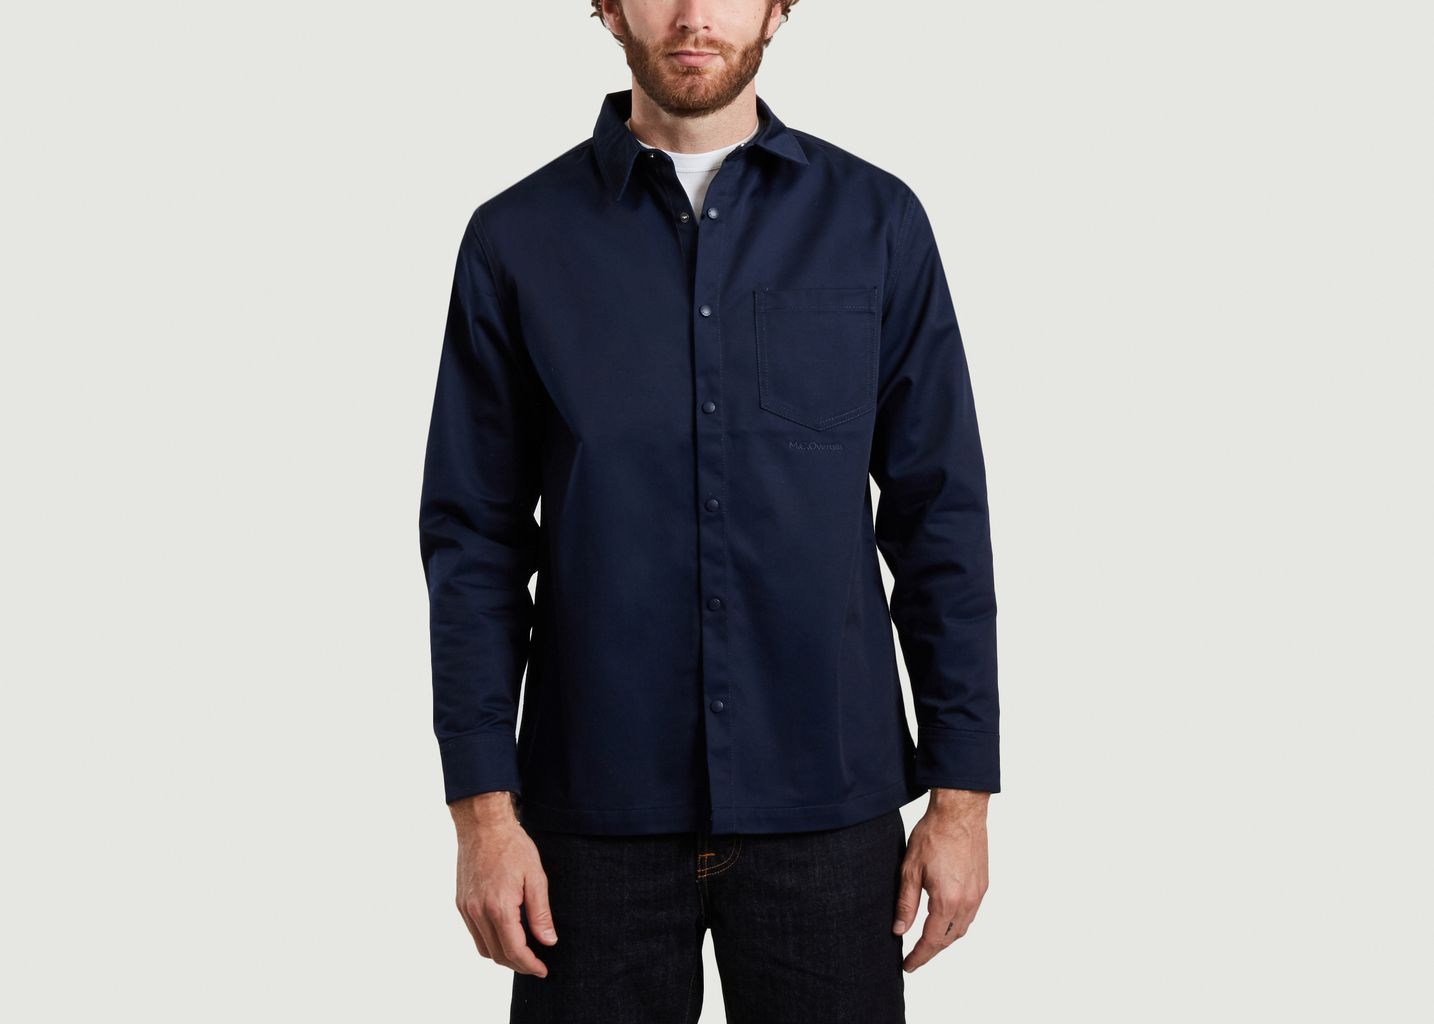 Mc Overalls Navy Blue Oversize Shirt With Pocket